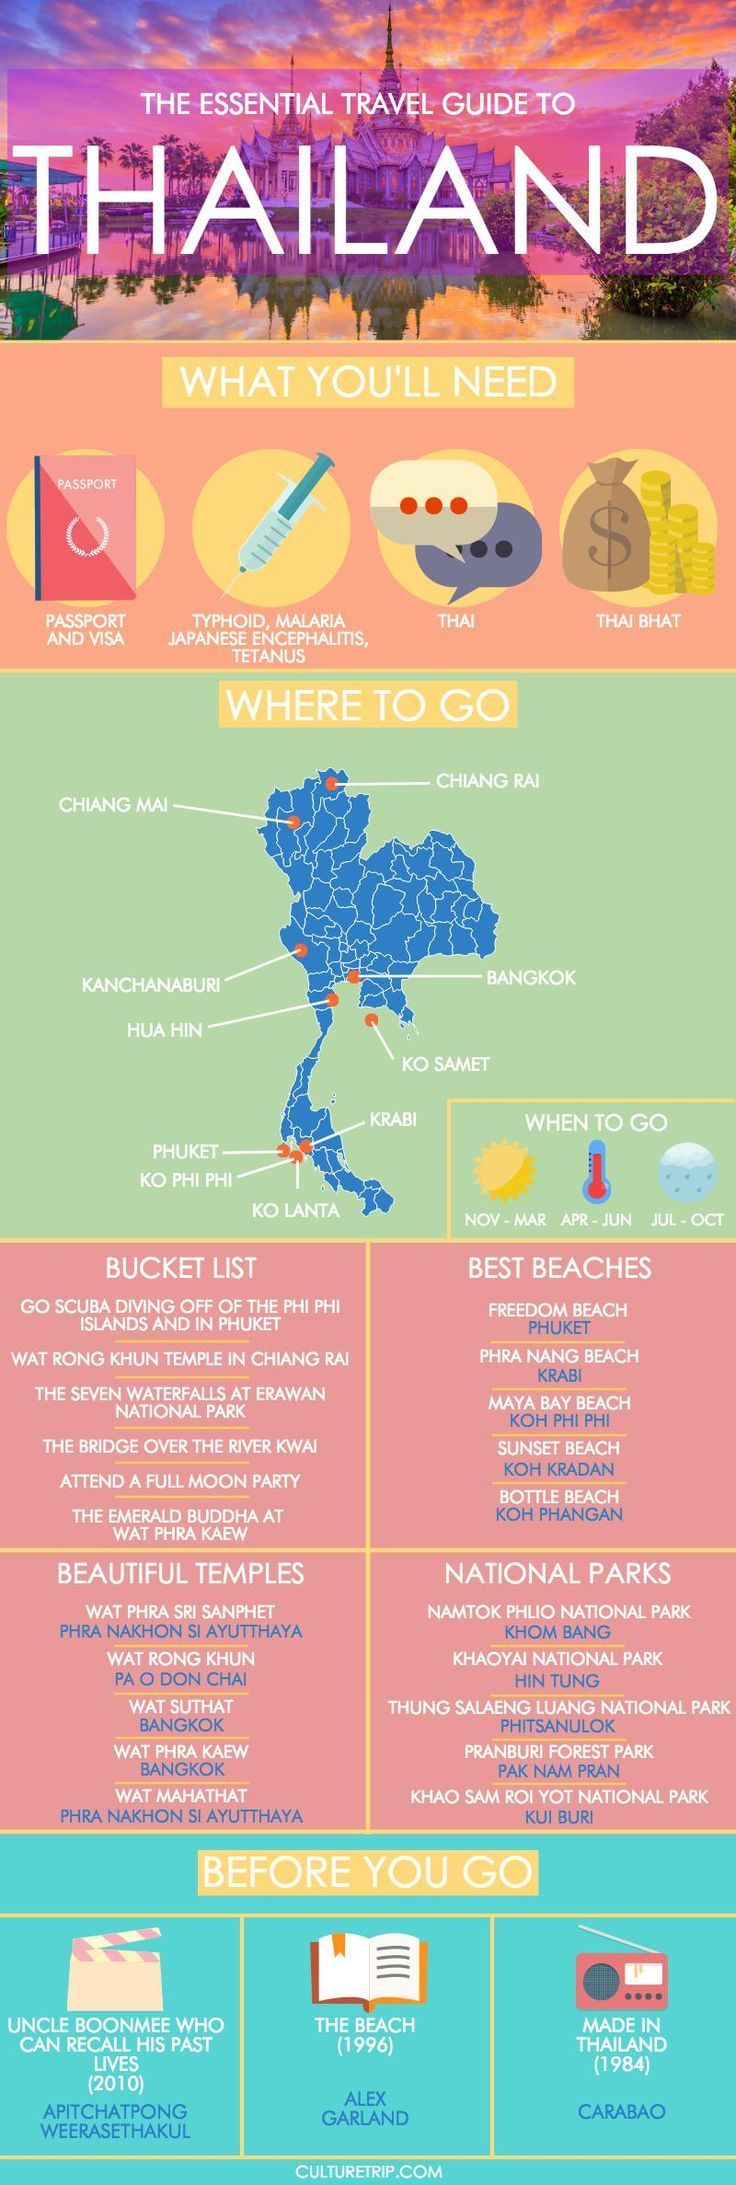 Your Essential Travel Guide to Thailand (Infographic)